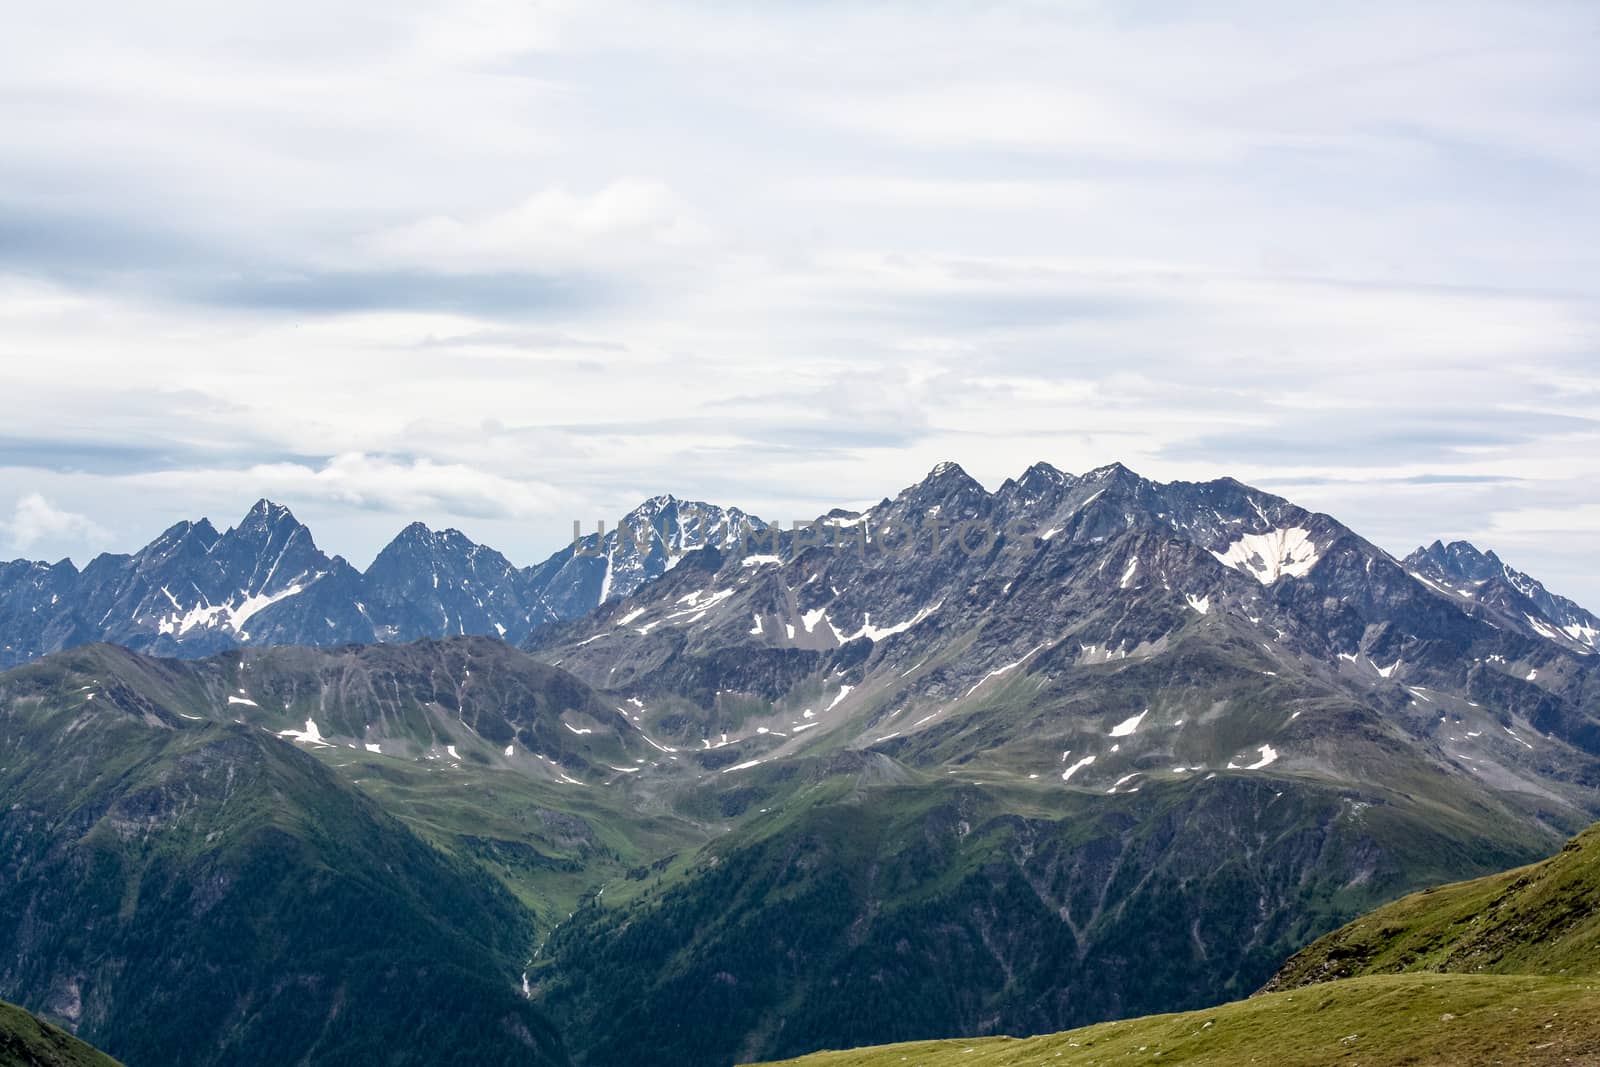 A beautiful view of the Austrian Alps by DmitryOsipov